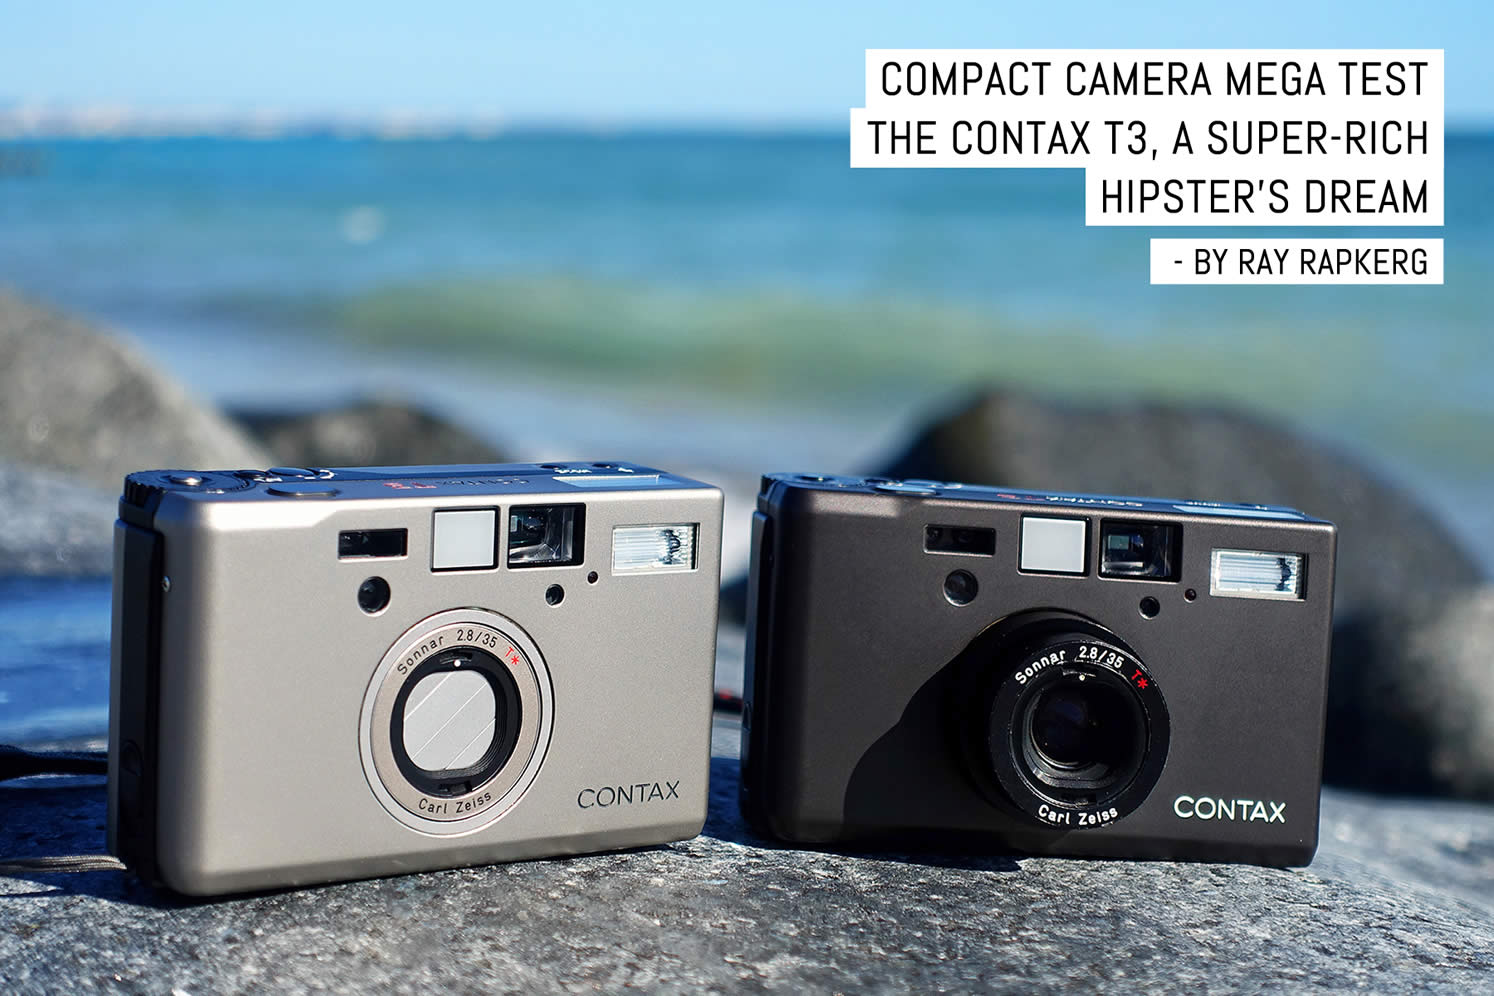 Compact camera mega test: The Contax T3, a super-rich hipster's 